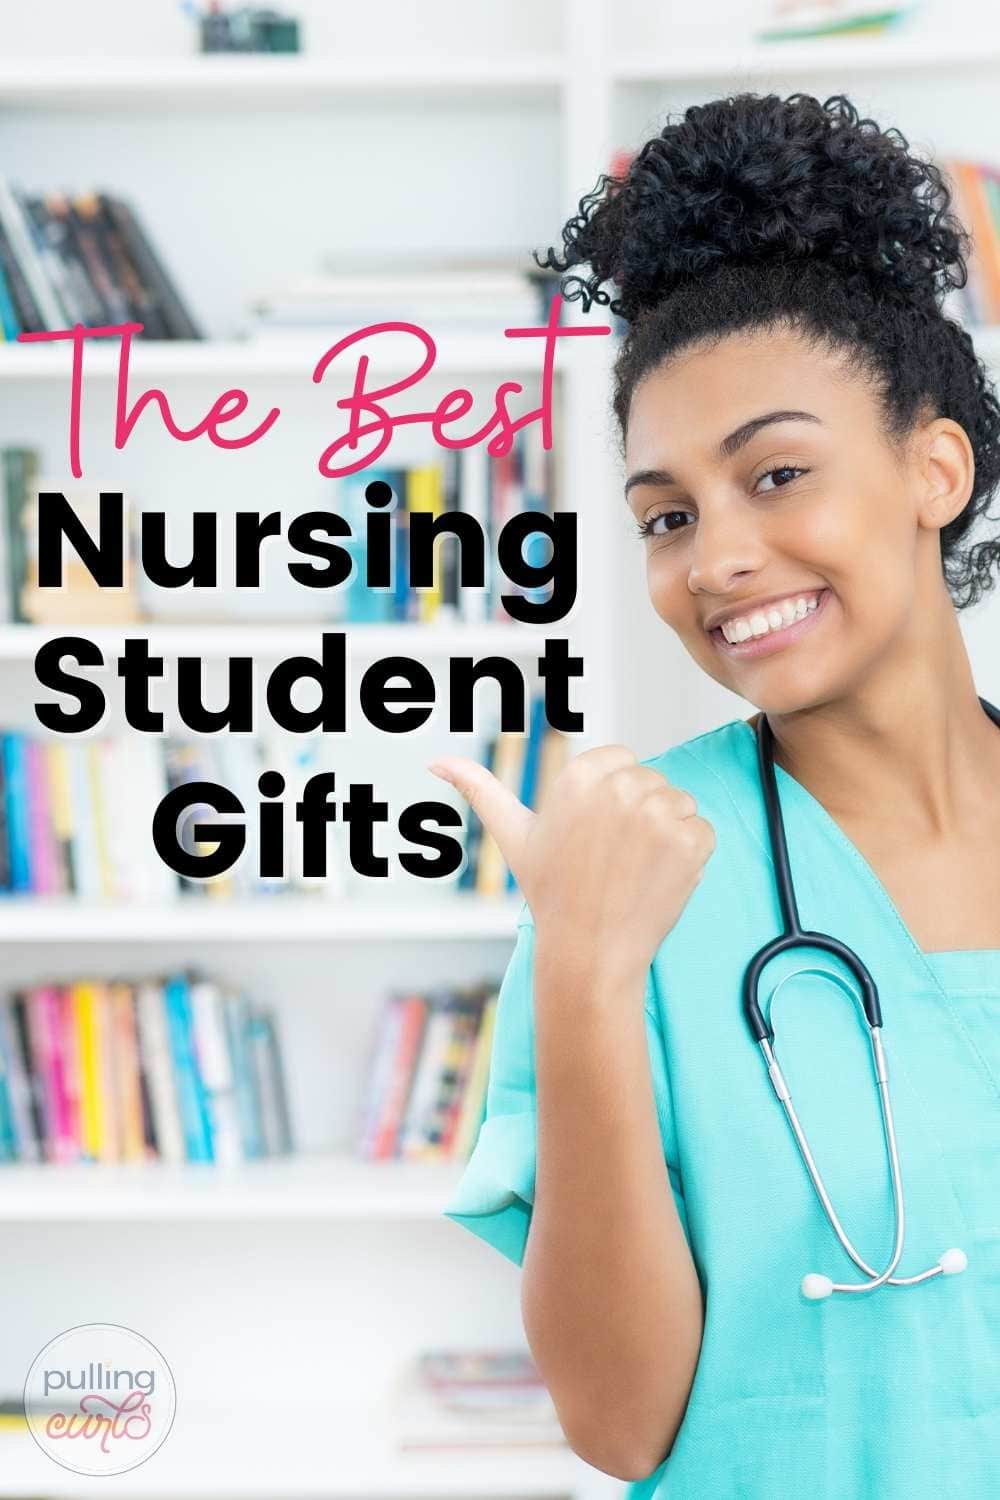 nursing student gift cards new nurse perfect gift best gifts long shifts compression socks great gift practical gifts great way pen light nursing school tote bag thoughtful gift student nurses littmann stethoscope badge reel hard work night shift nurse gifts student gifts 12-hour shifts special nurse clinical rotations essential oils healthcare workers via @pullingcurls